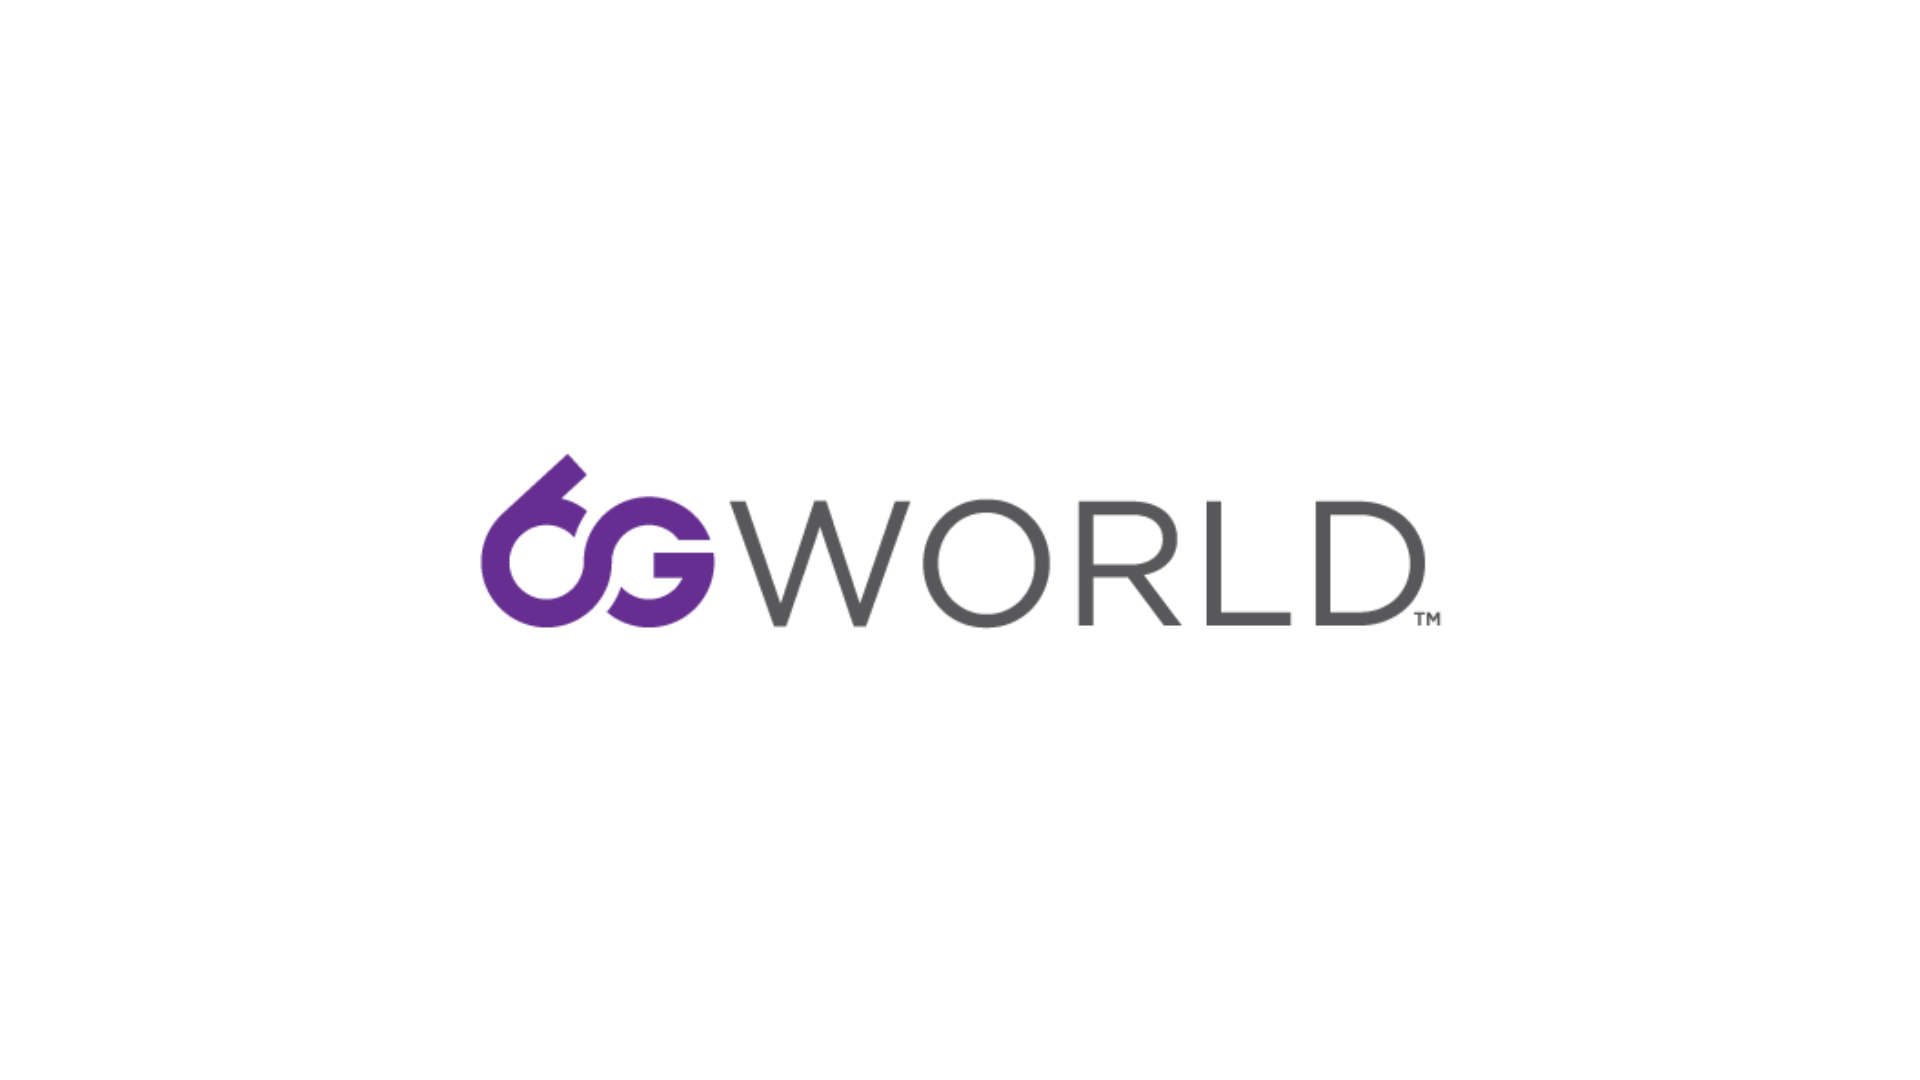 6GWorld | Video Interview: Can We Make A 6G That Users Want?